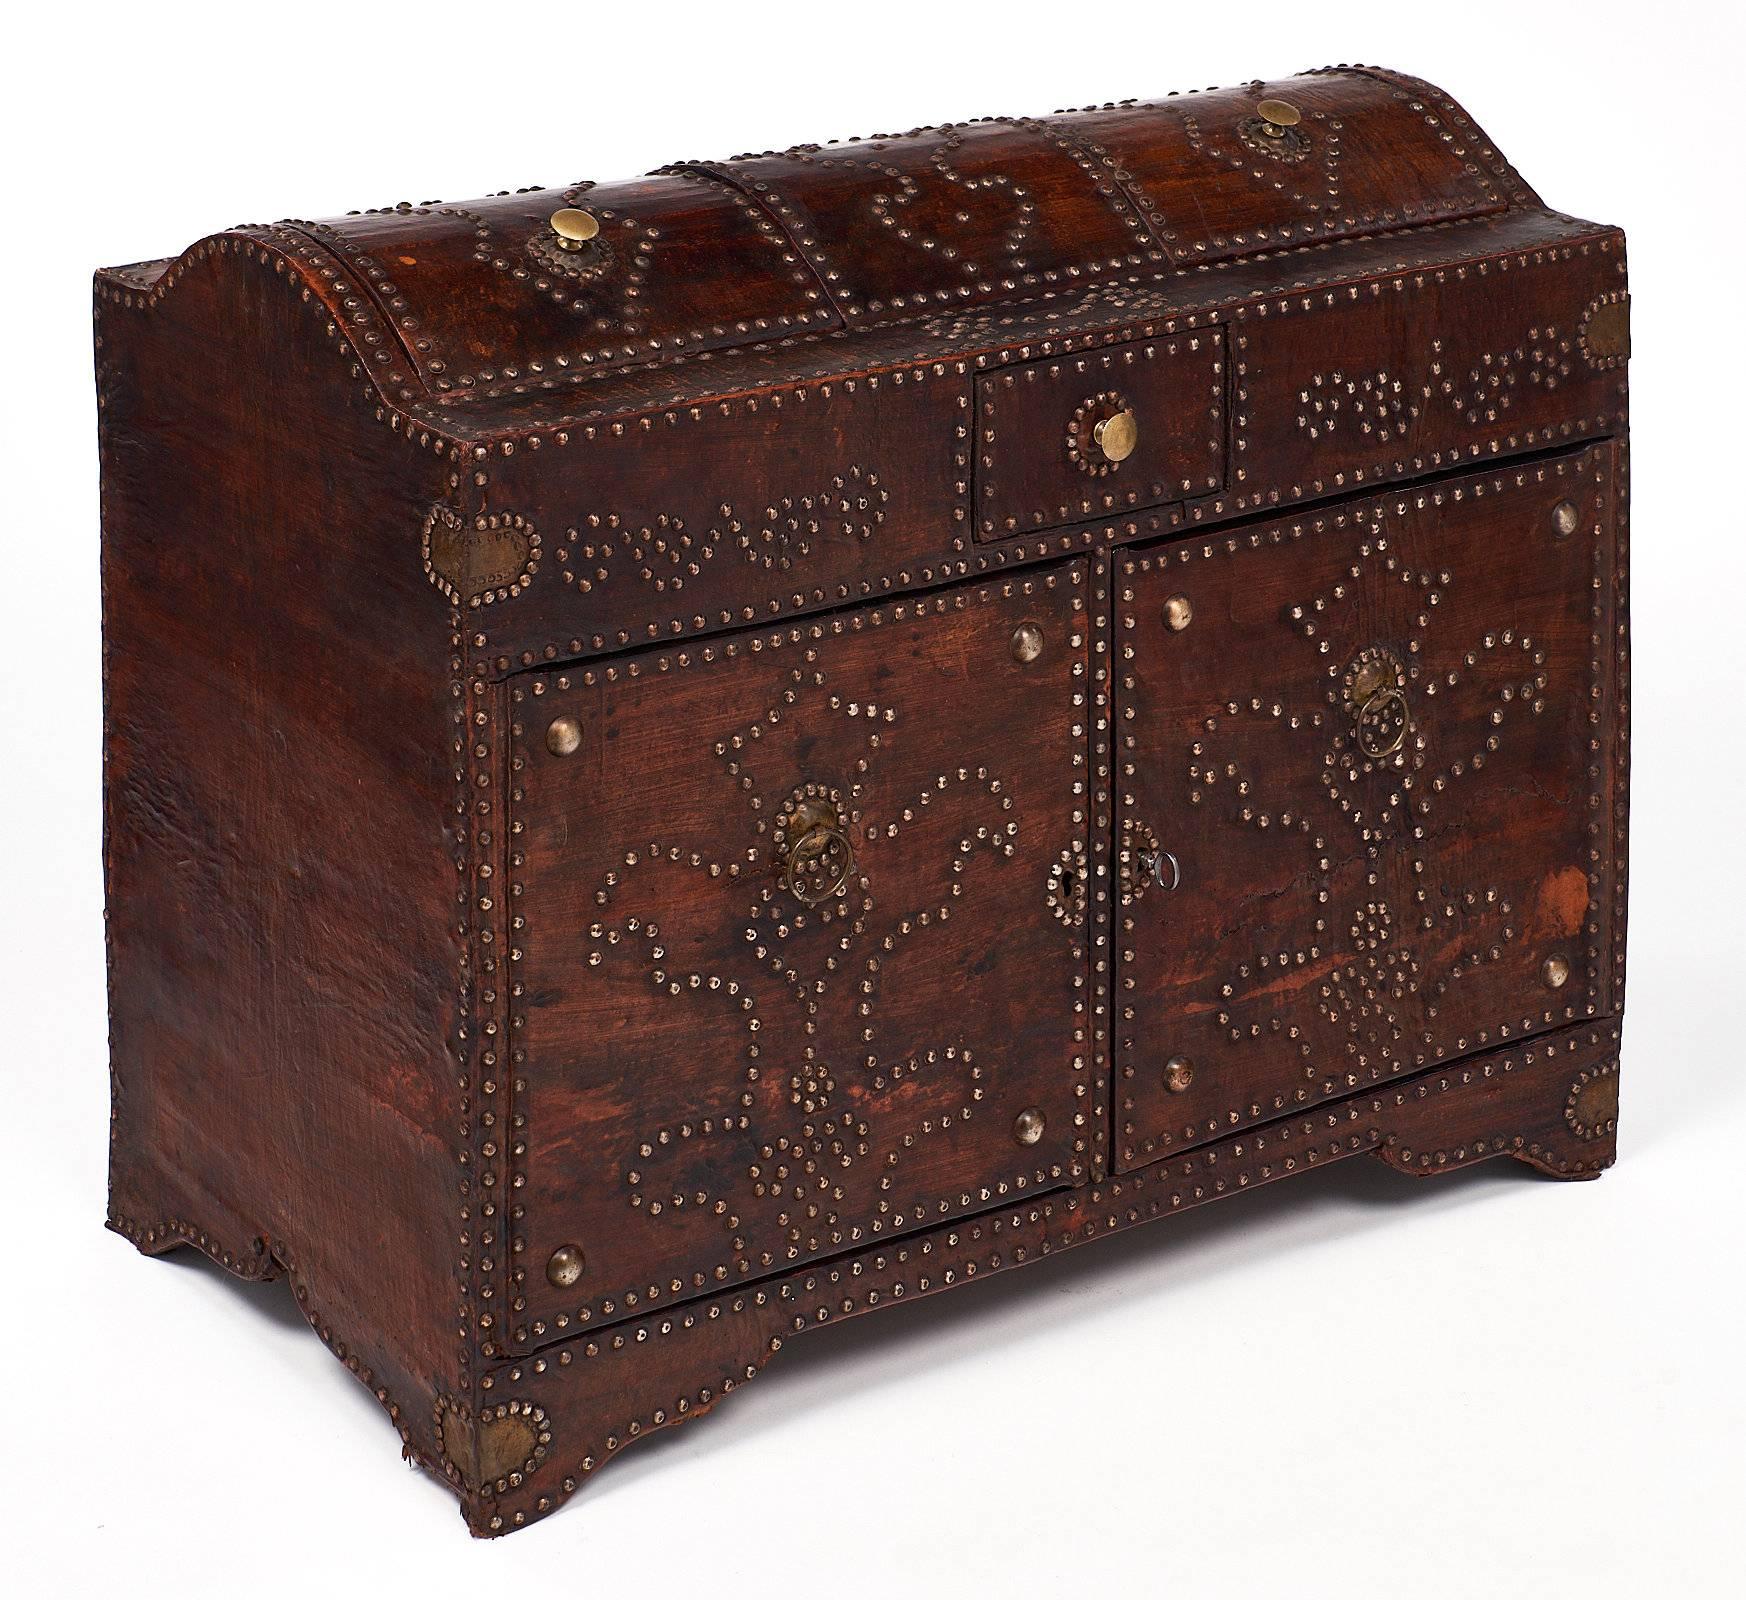 Beautifully intricate wooden trunk wrapped in Moroccan leather and adorned with beautiful designs make of brass studs. This piece has two compartments on top that lift open, as well as two doors on the front for storage. The interior is lined with